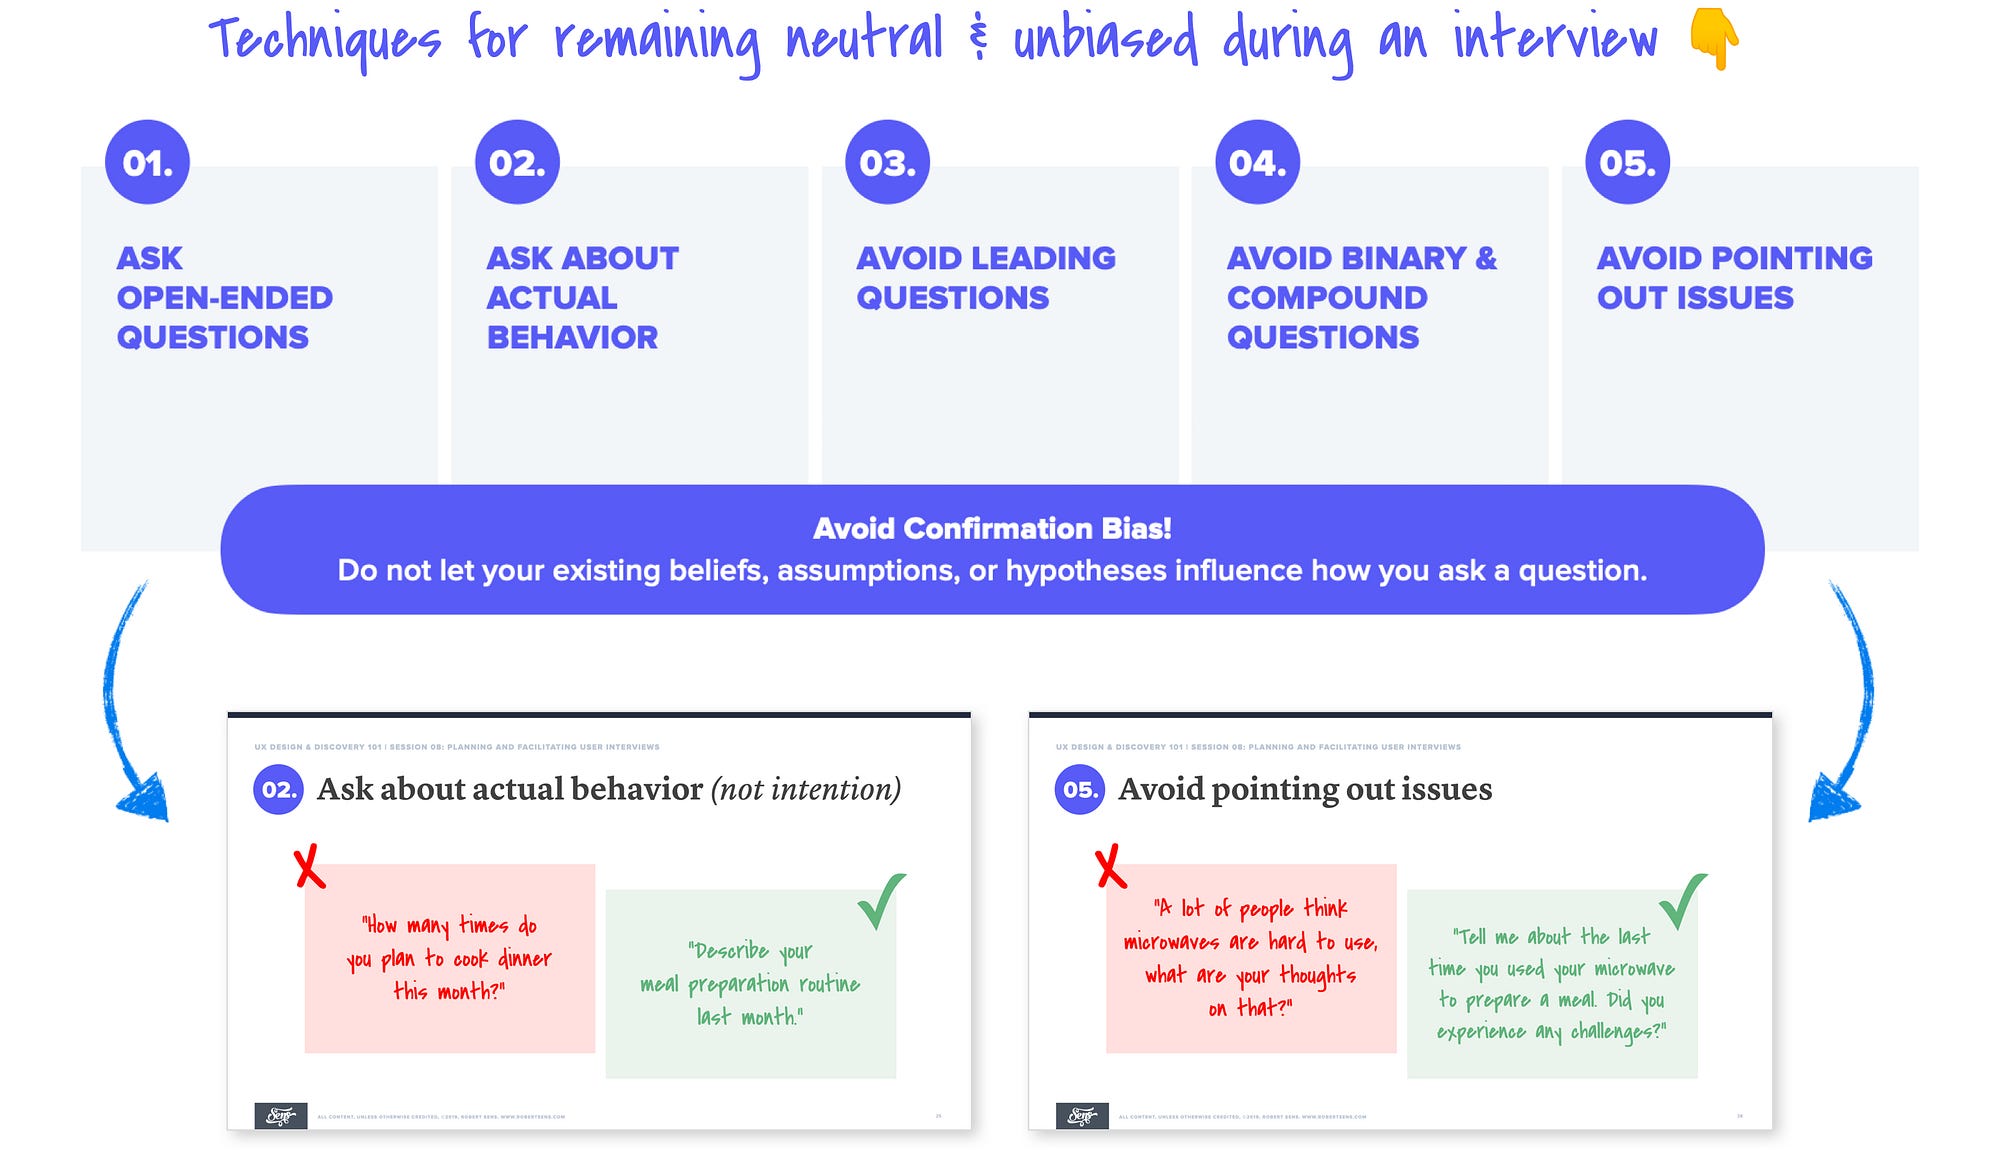 A PM's guide to conducting 1:1 user interviews, by Niharika